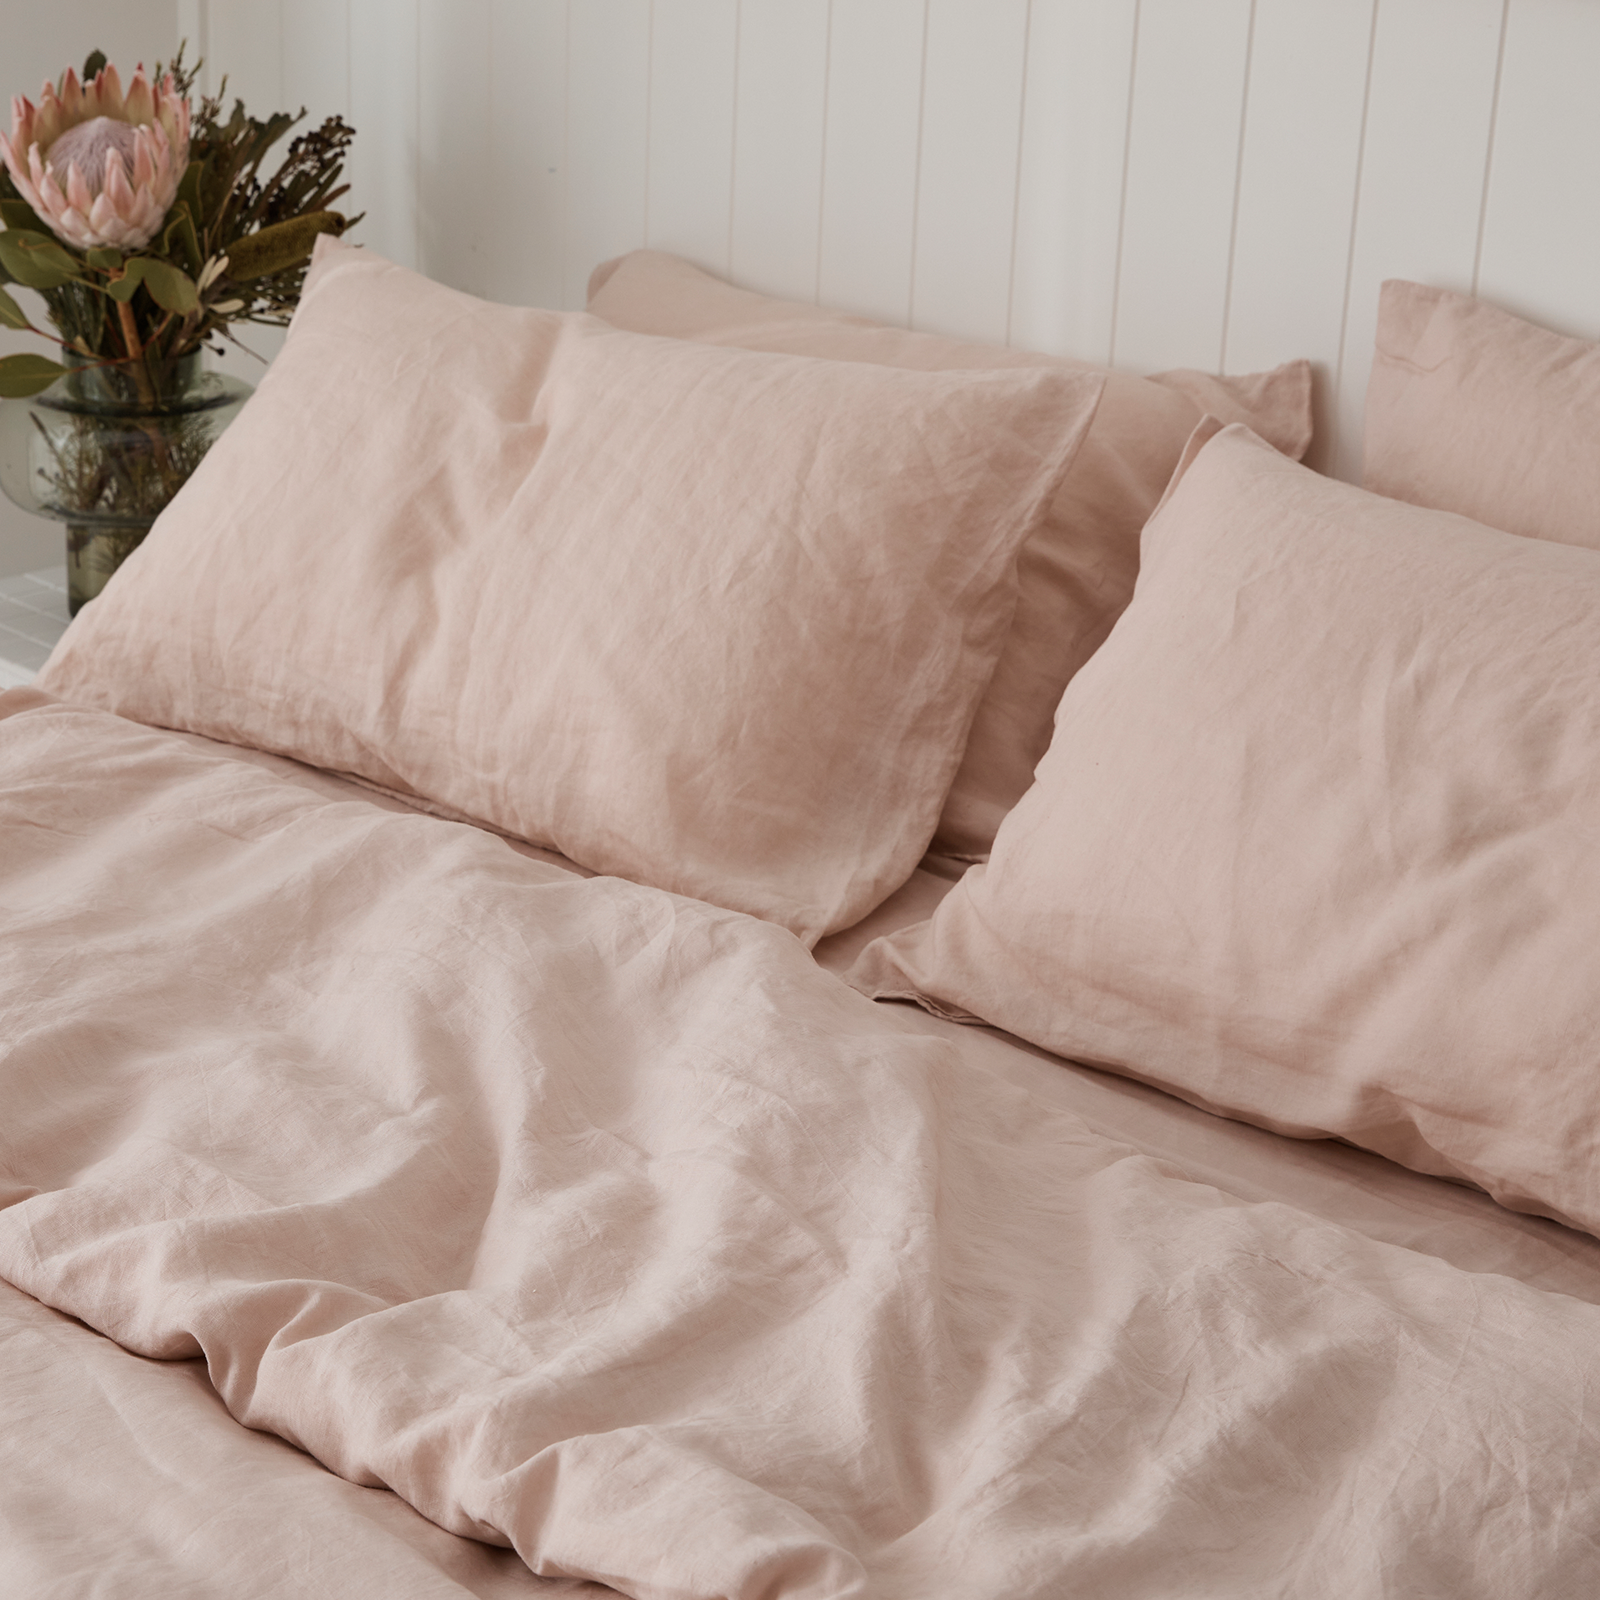 100% pure French linen Duvet Cover in Blush